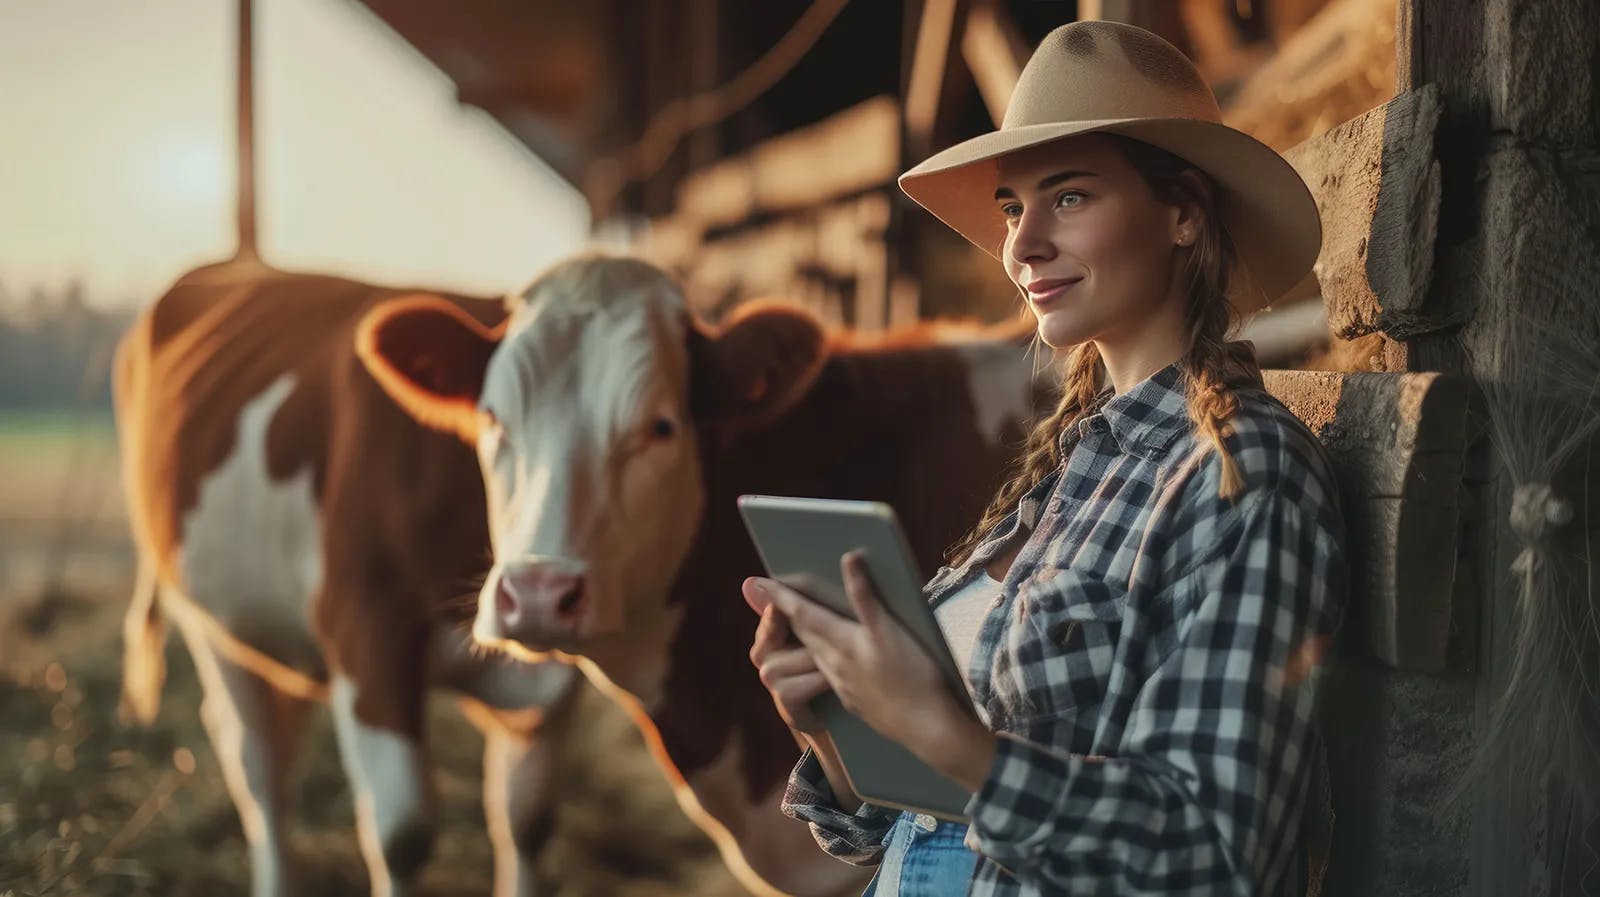 Agriculture and technology concept. Female farmer with tablet standing by cow at cattle farm